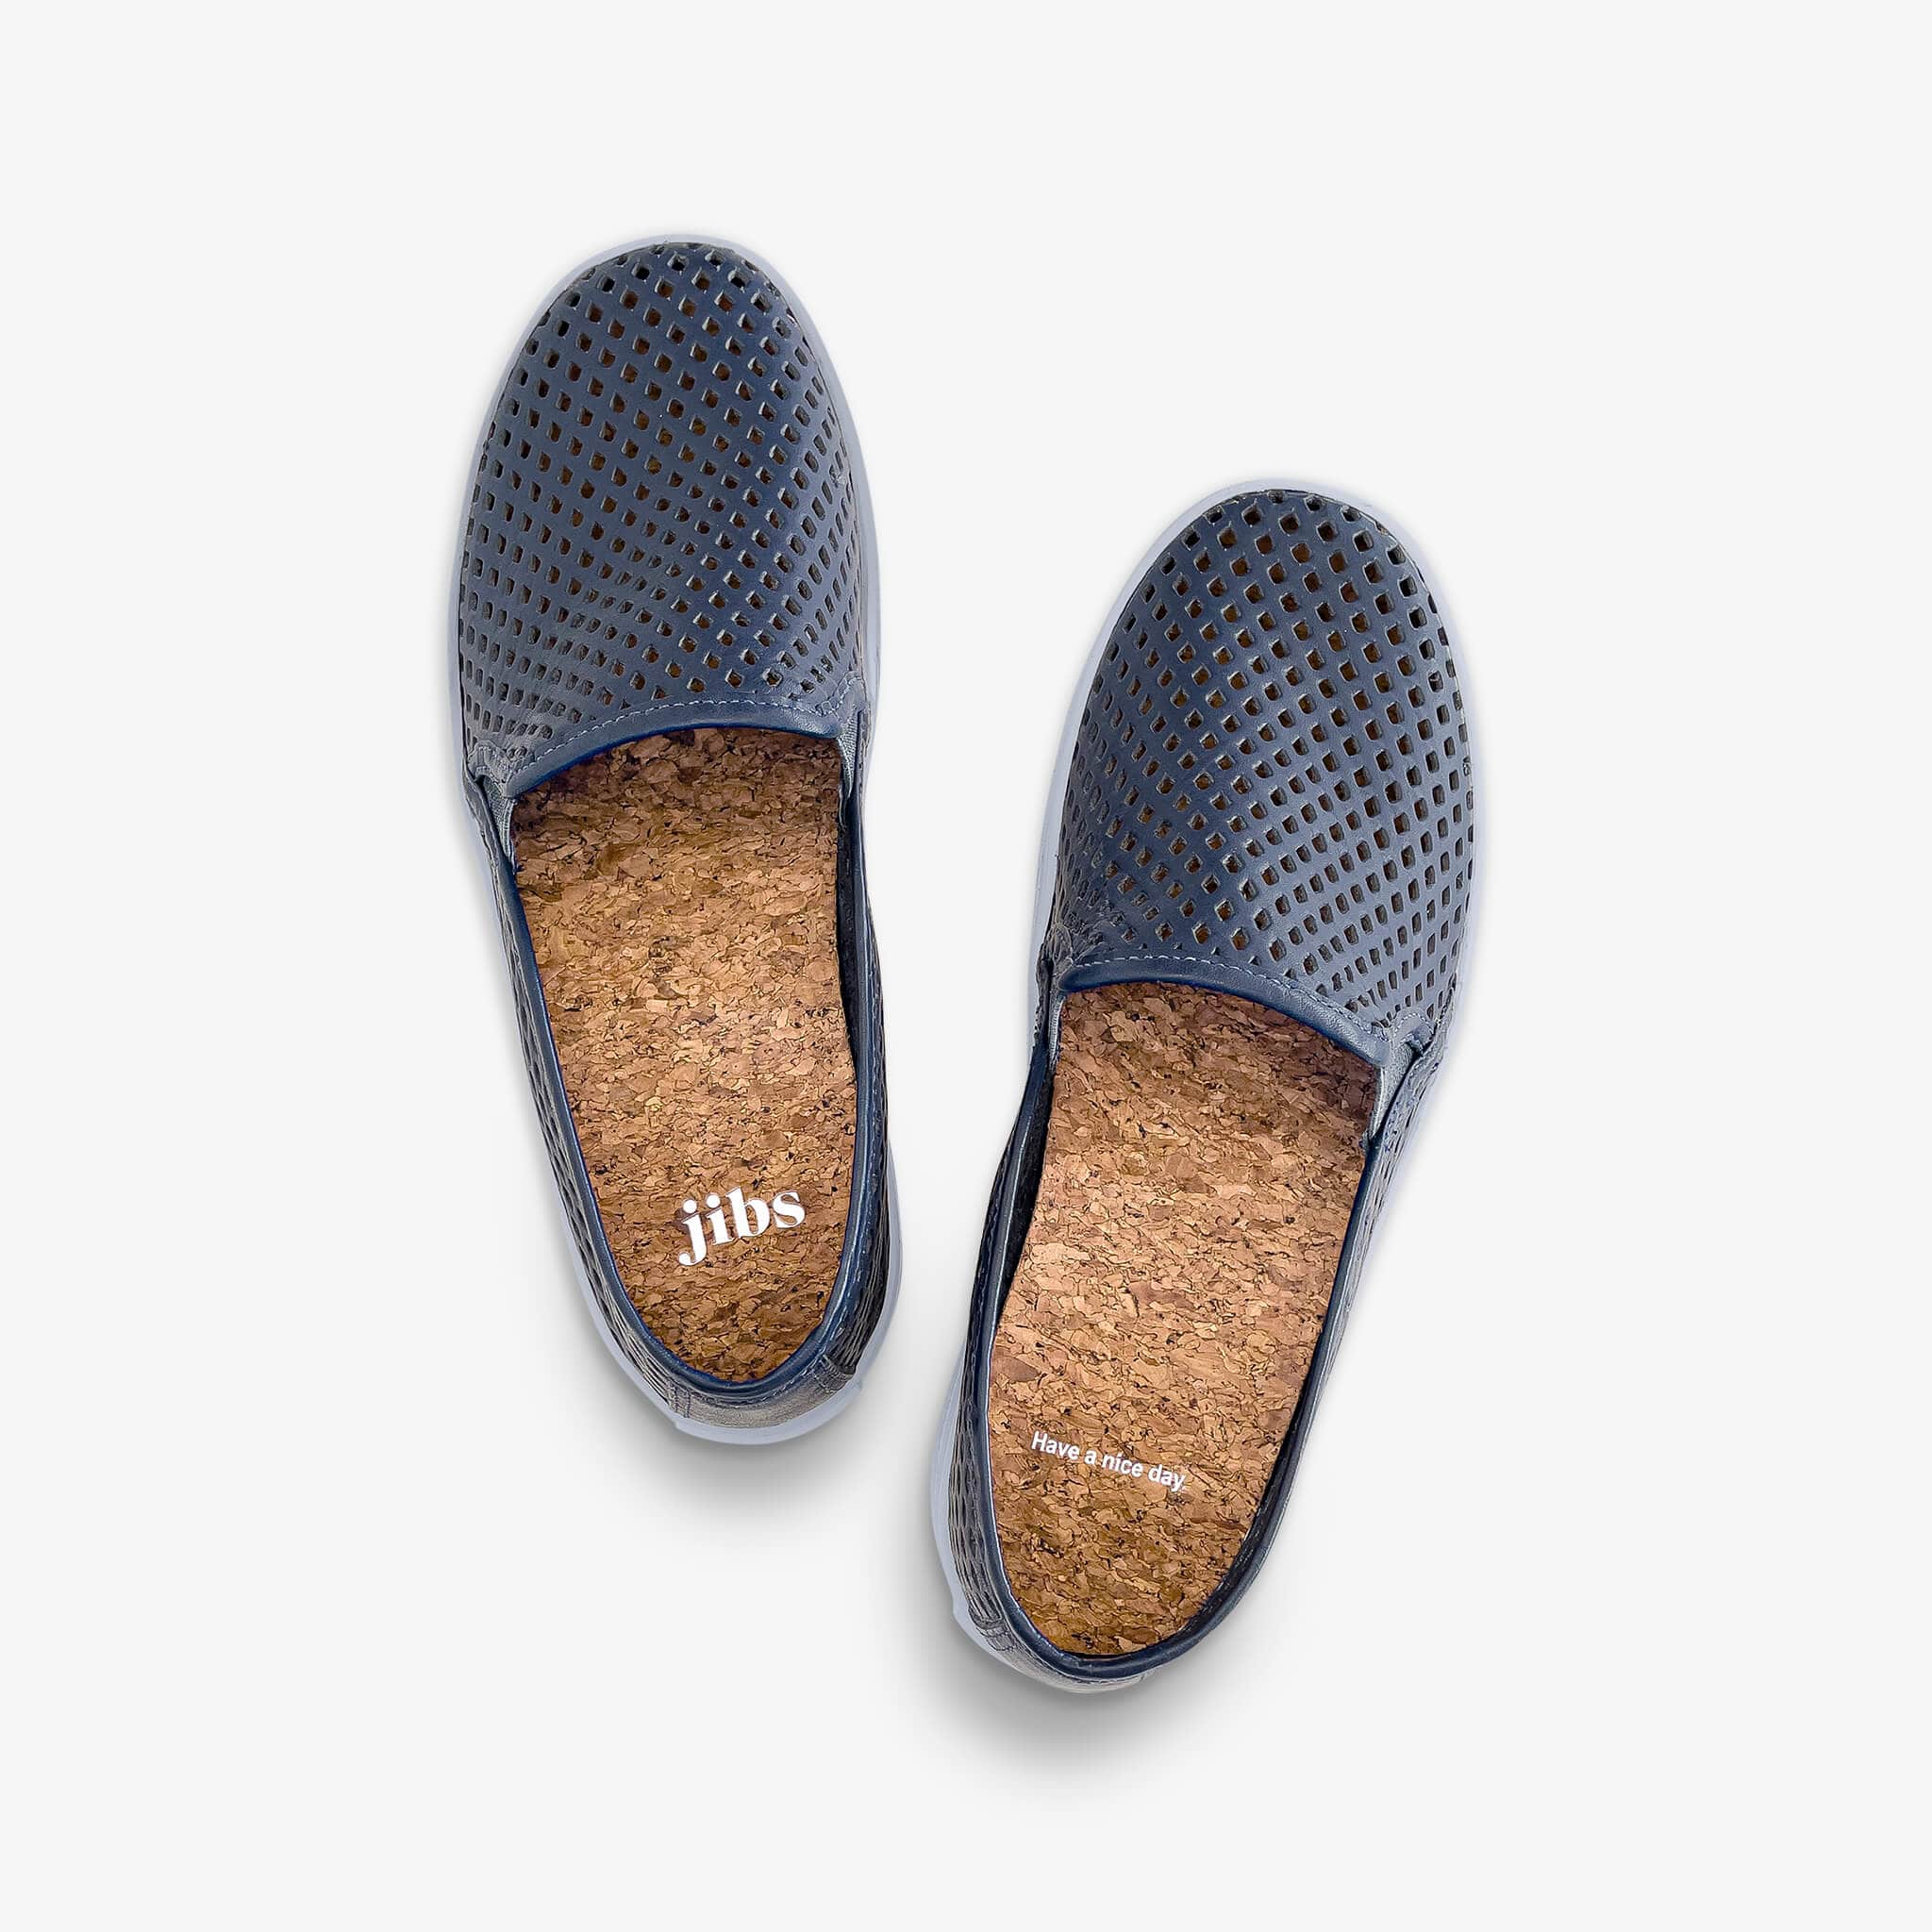 Jibs Classic Navy Slip On Sneaker-Shoe Top Have A Nice Day Cork In-sole